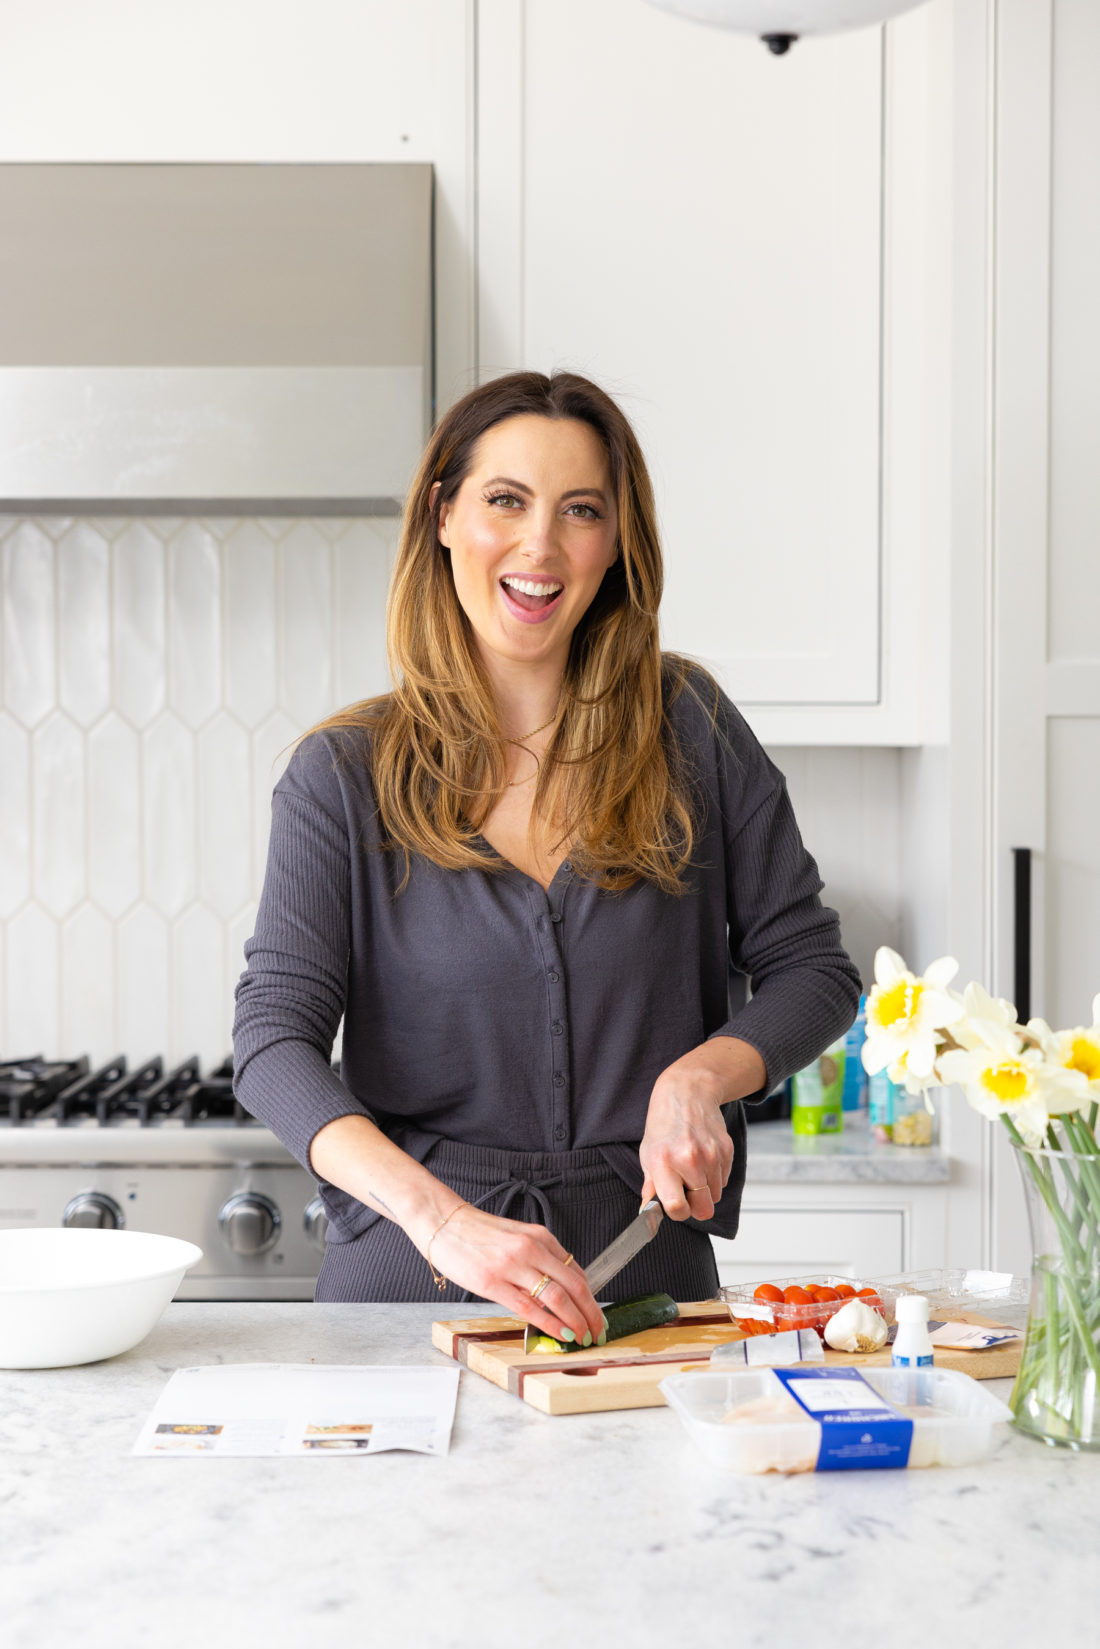 Eva Amurri shares how Blue Apron is helping her get out of her cooking rut